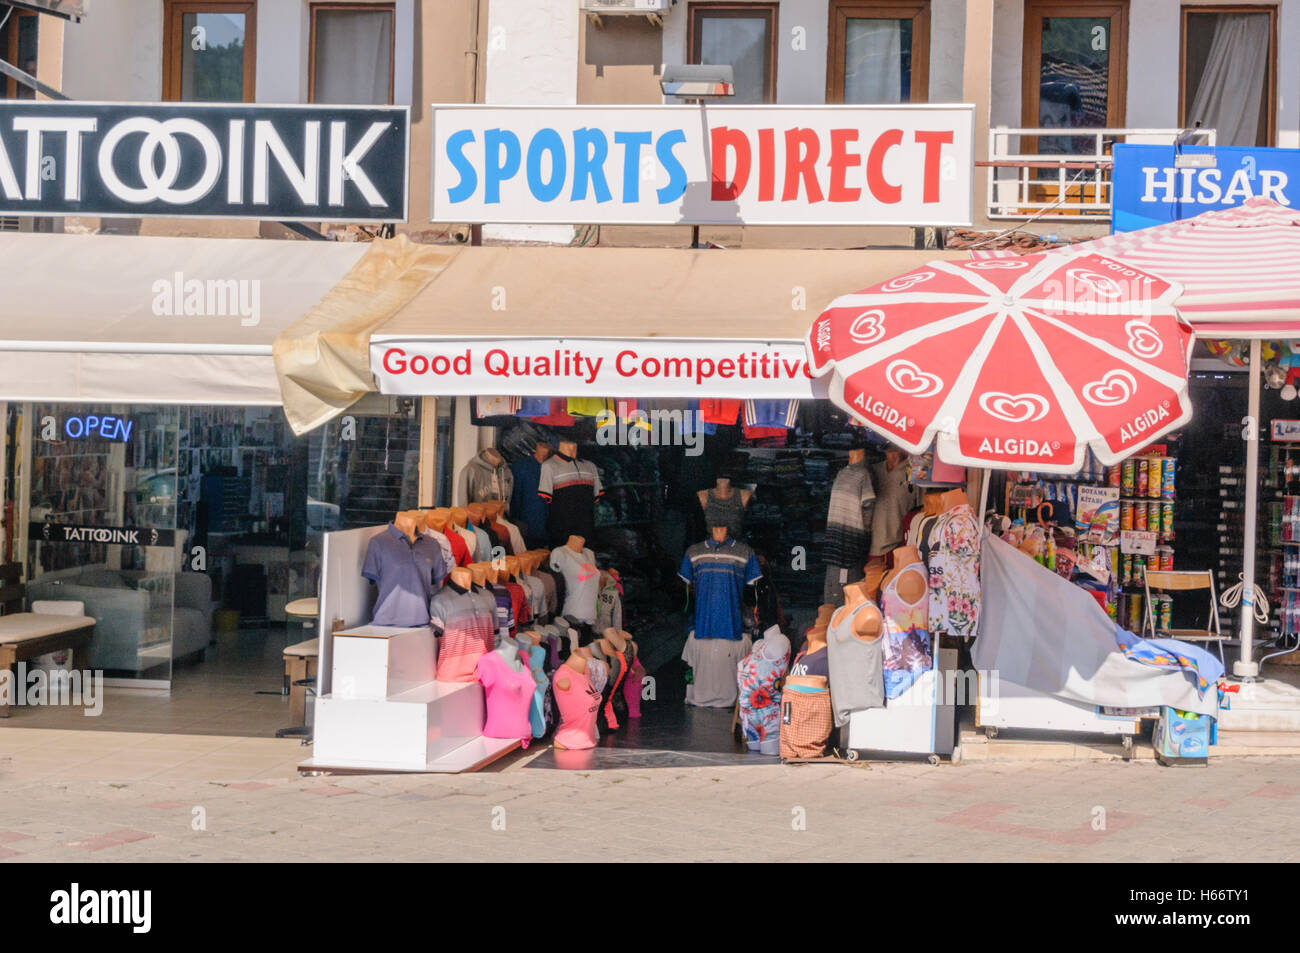 Shop in Turkey called "Sports Direct" selling counterfeit clothing and  sportswear Stock Photo - Alamy